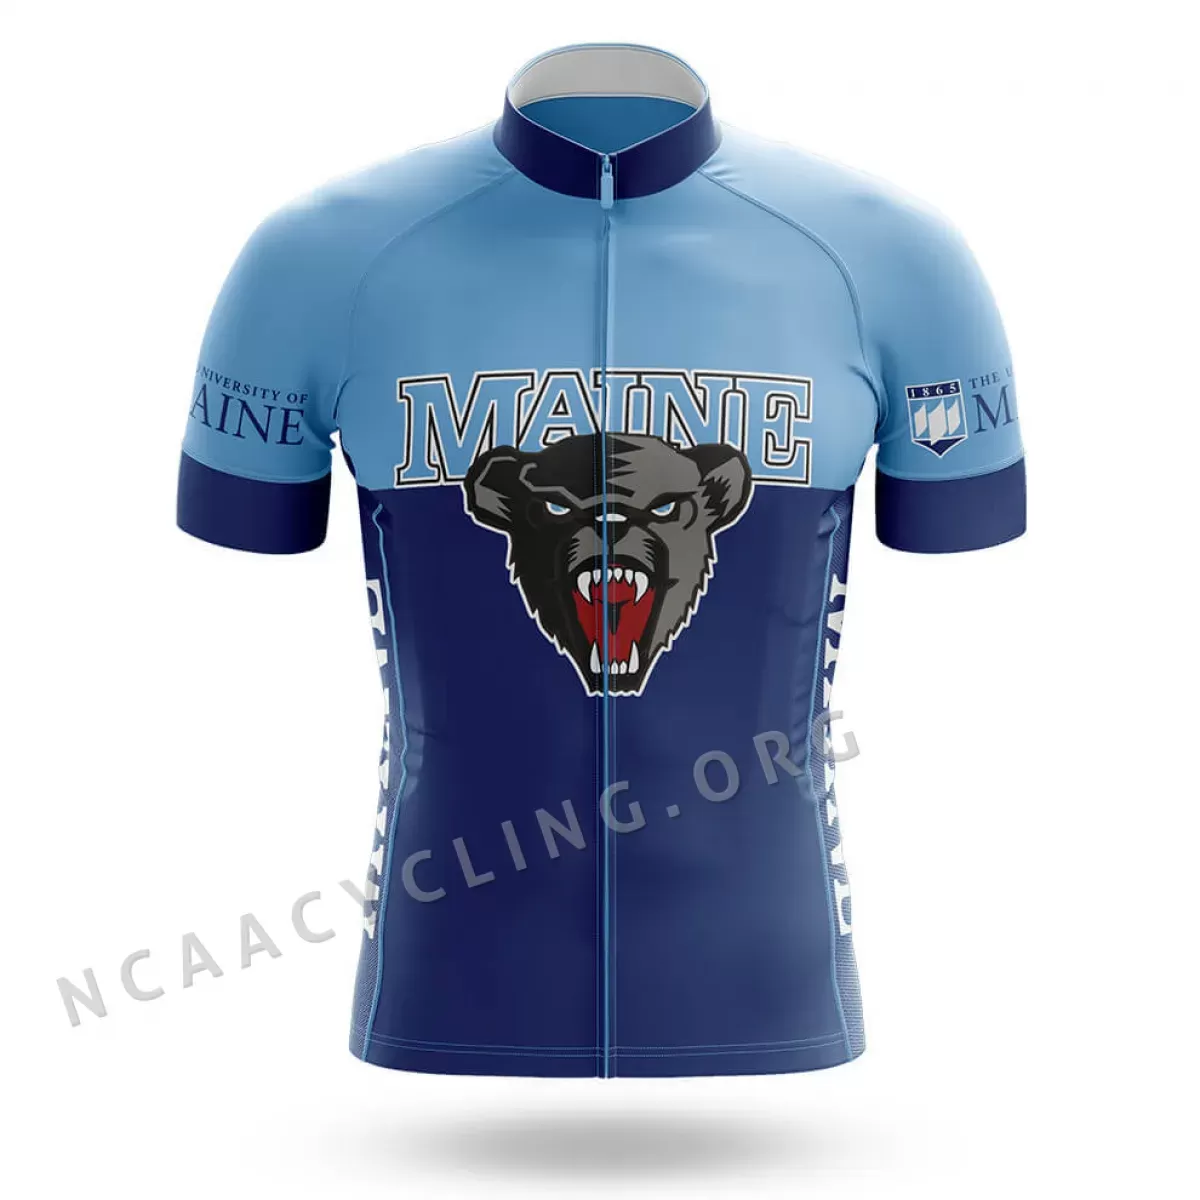 Where To Buy University Of Maine Cycling Jersey Ver.2